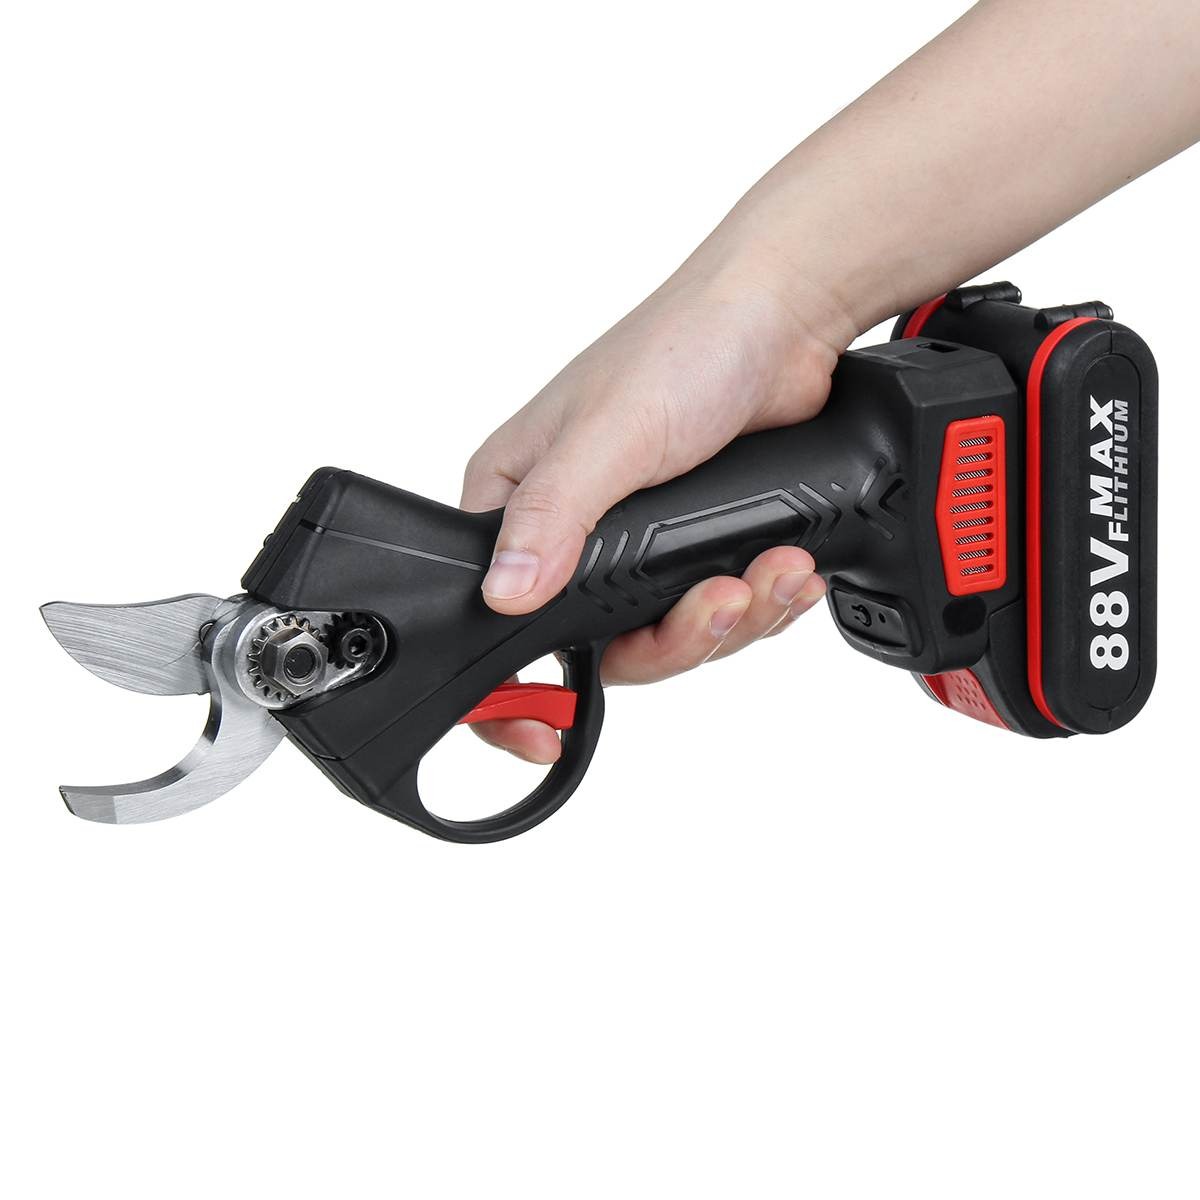 6 violeworks cordless electric pruning she main 4